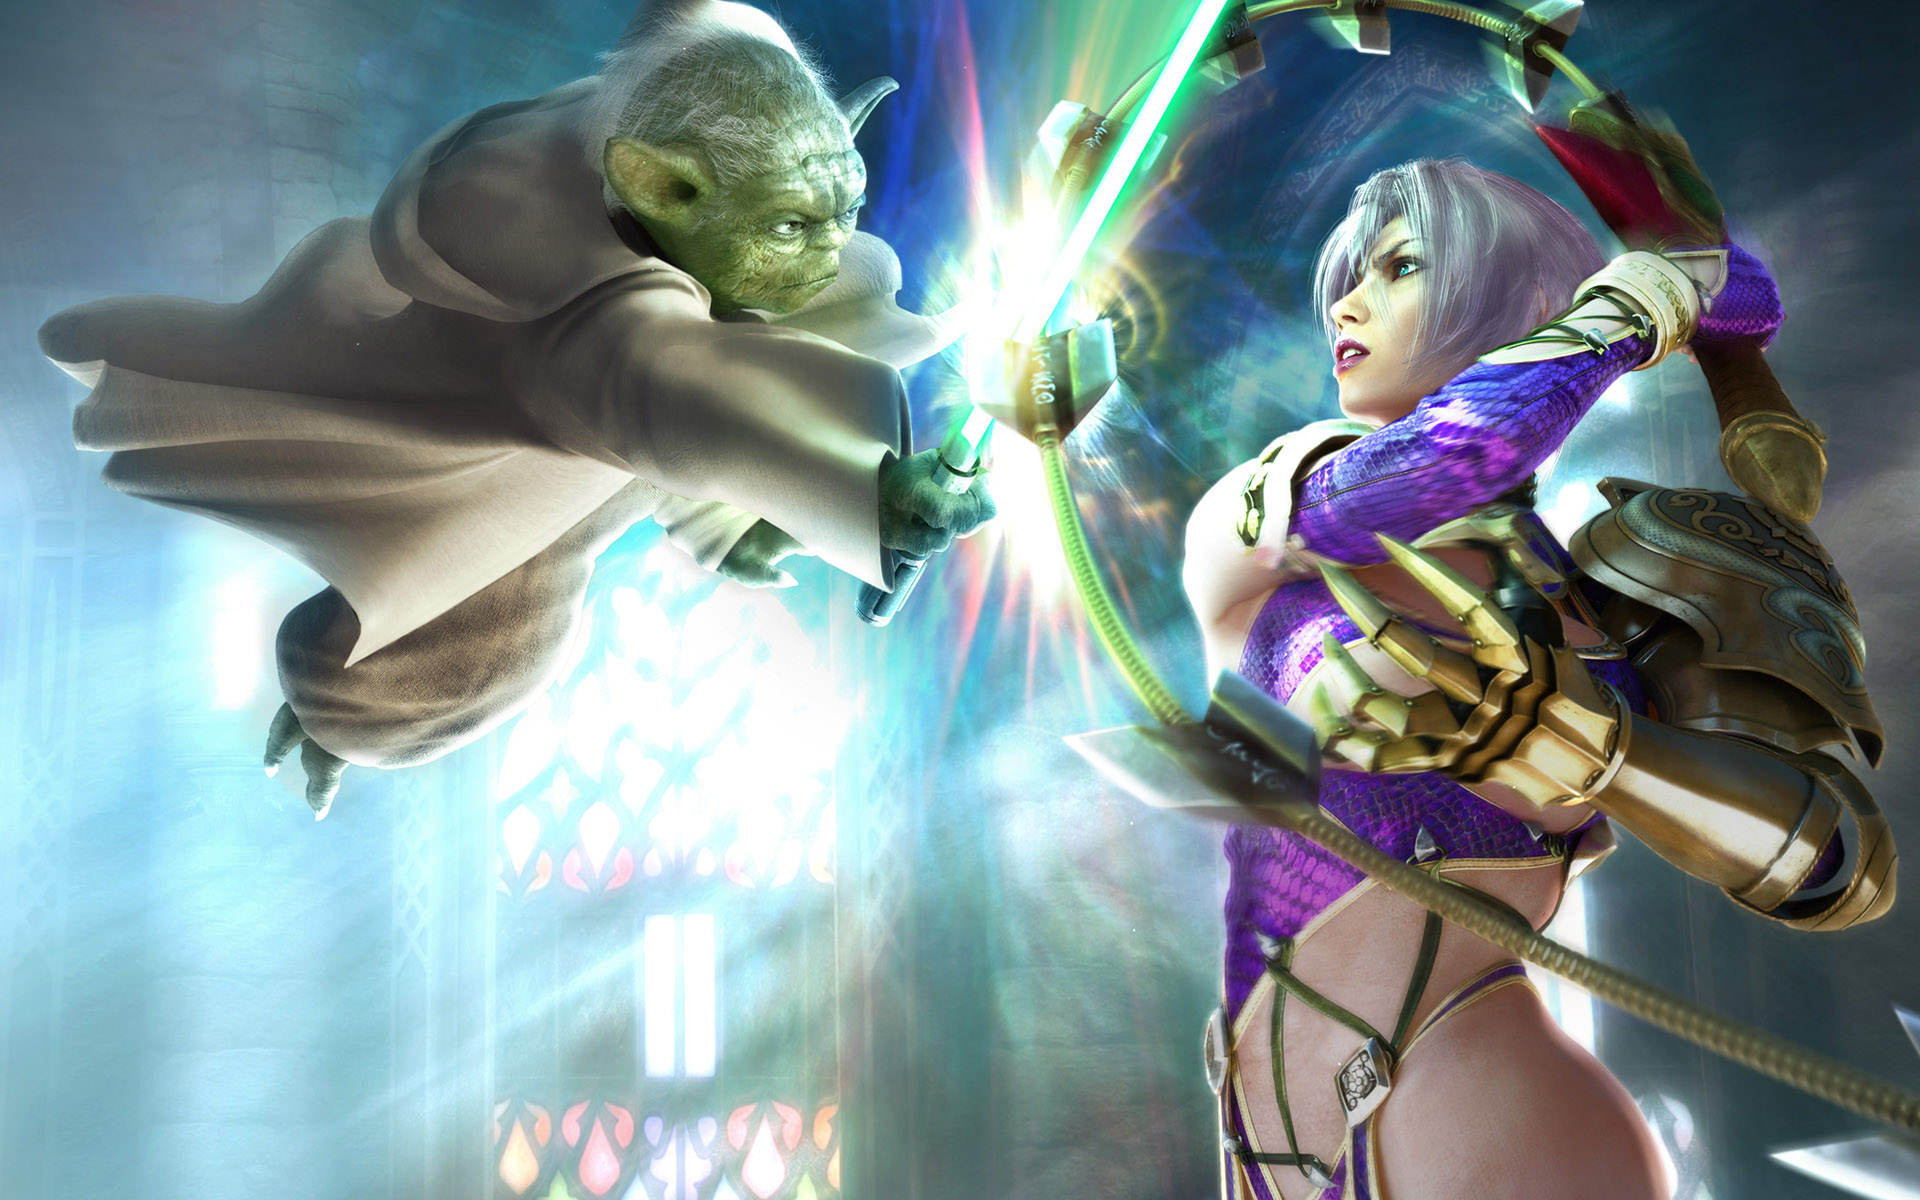 Yoda engaging in an epic battle in a game.